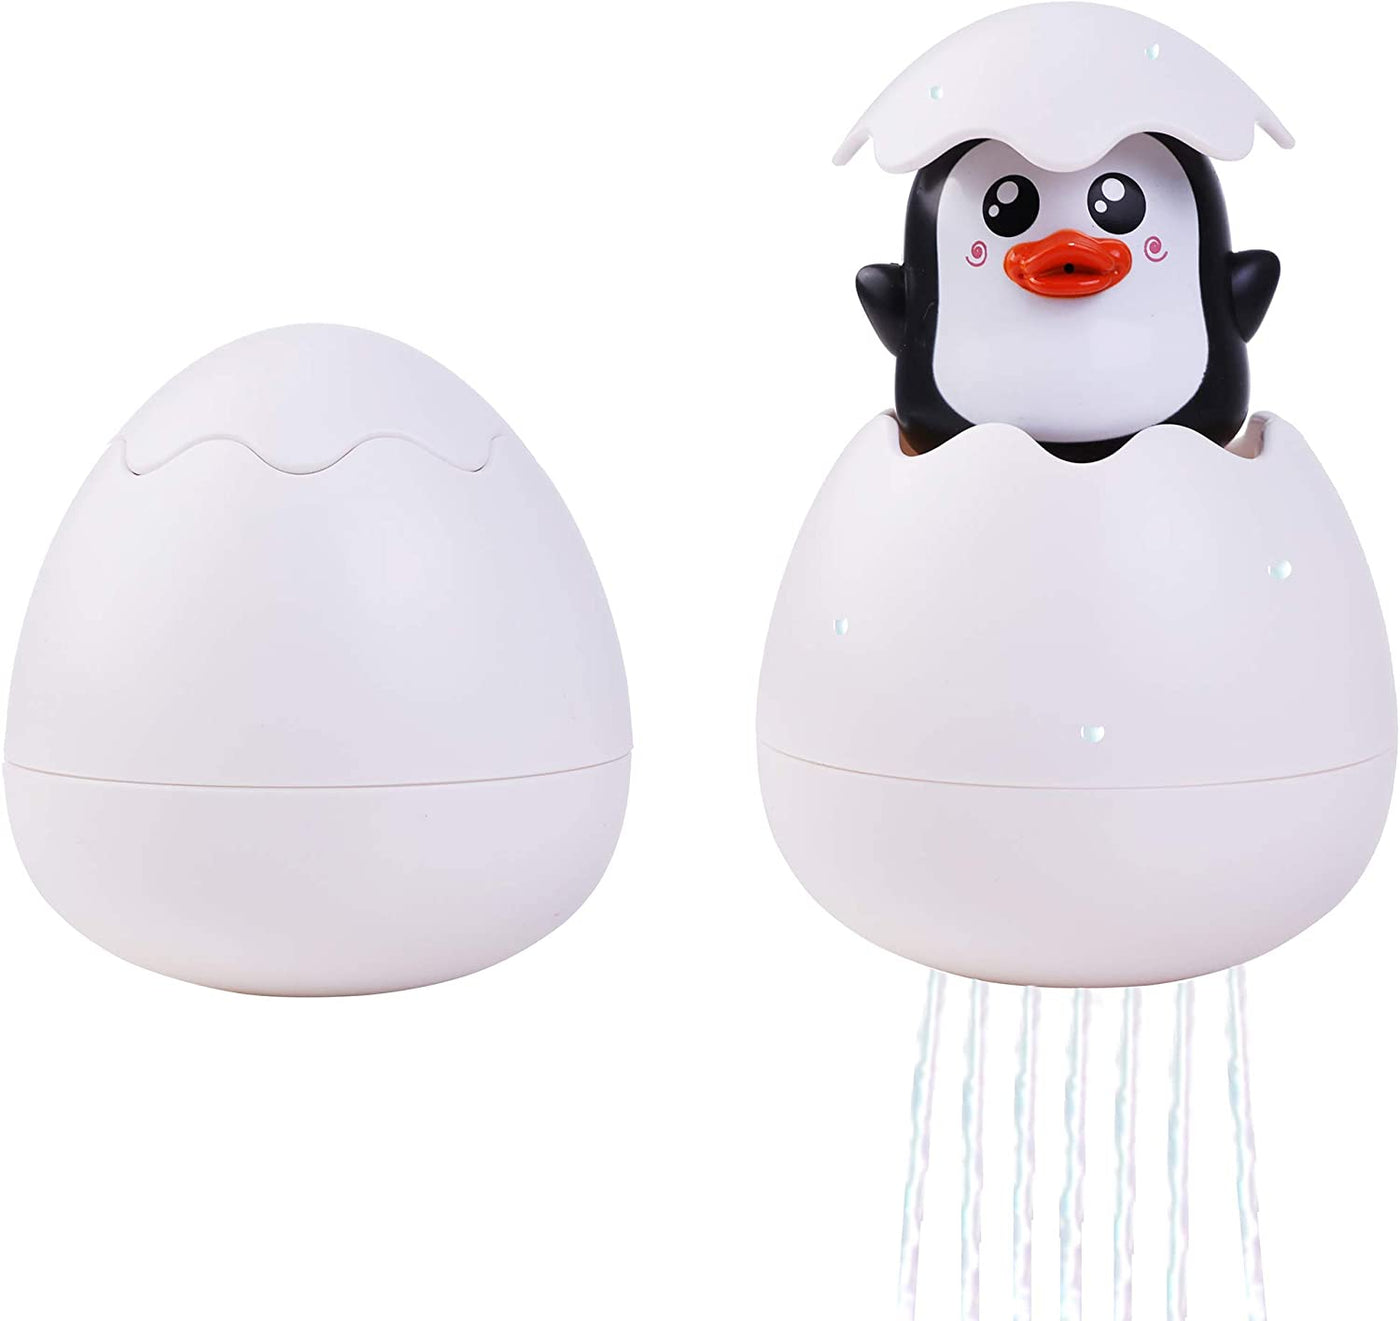 Summer Fun Penguins Eggs Basket Stuffers,Baby Bath Toys For Toddlers 1-3 Old Years Baby